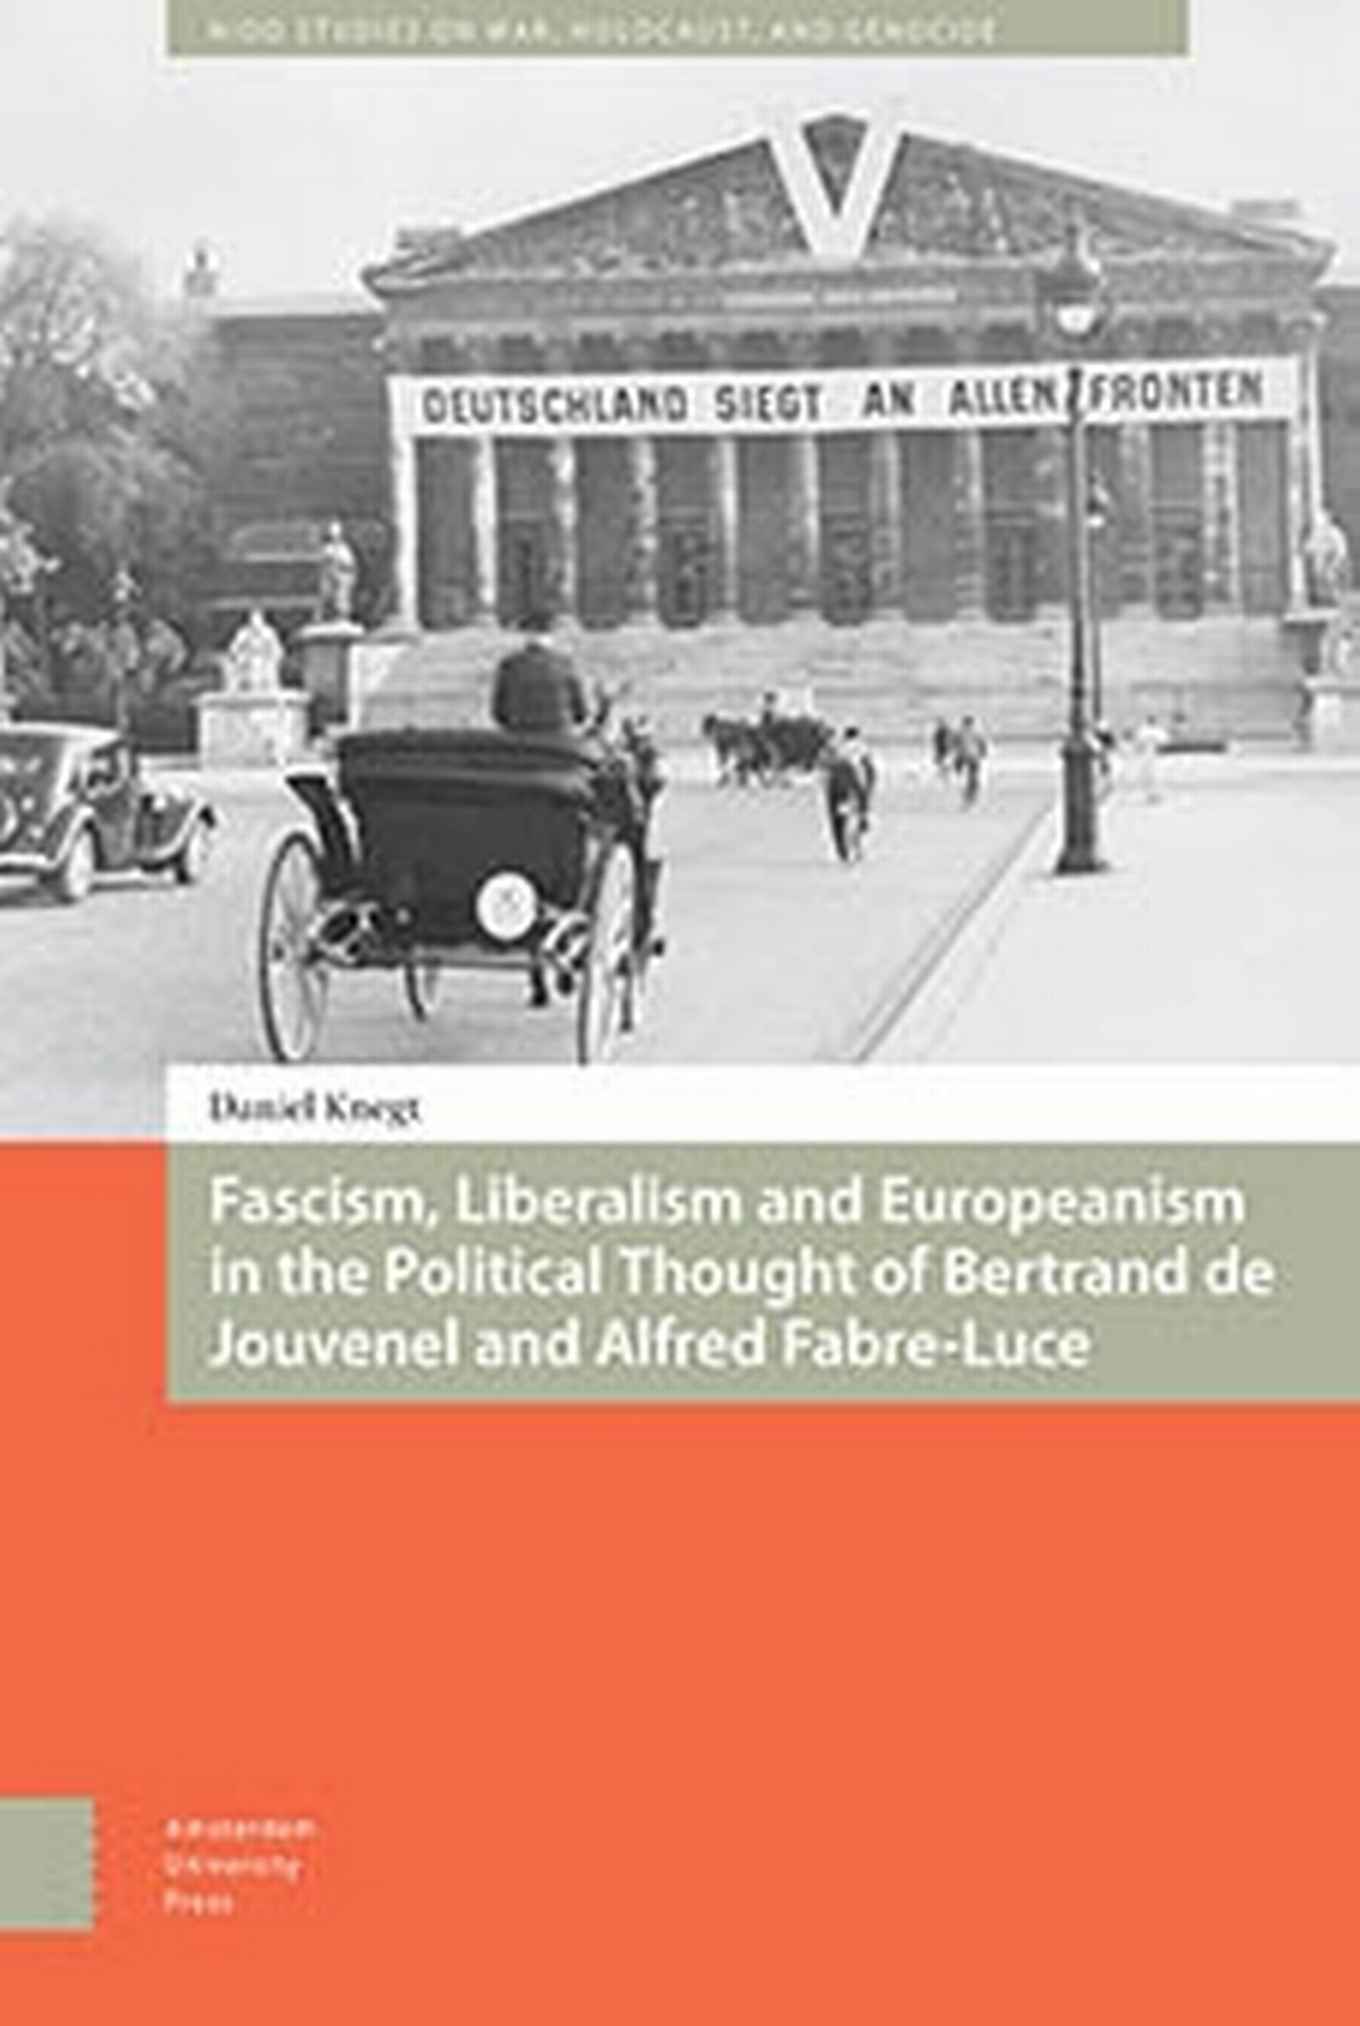 Fascism, Liberalism and Europeanism in the Political Thought of Bertrand de Jouvenel and Alfred Fabre-Luce